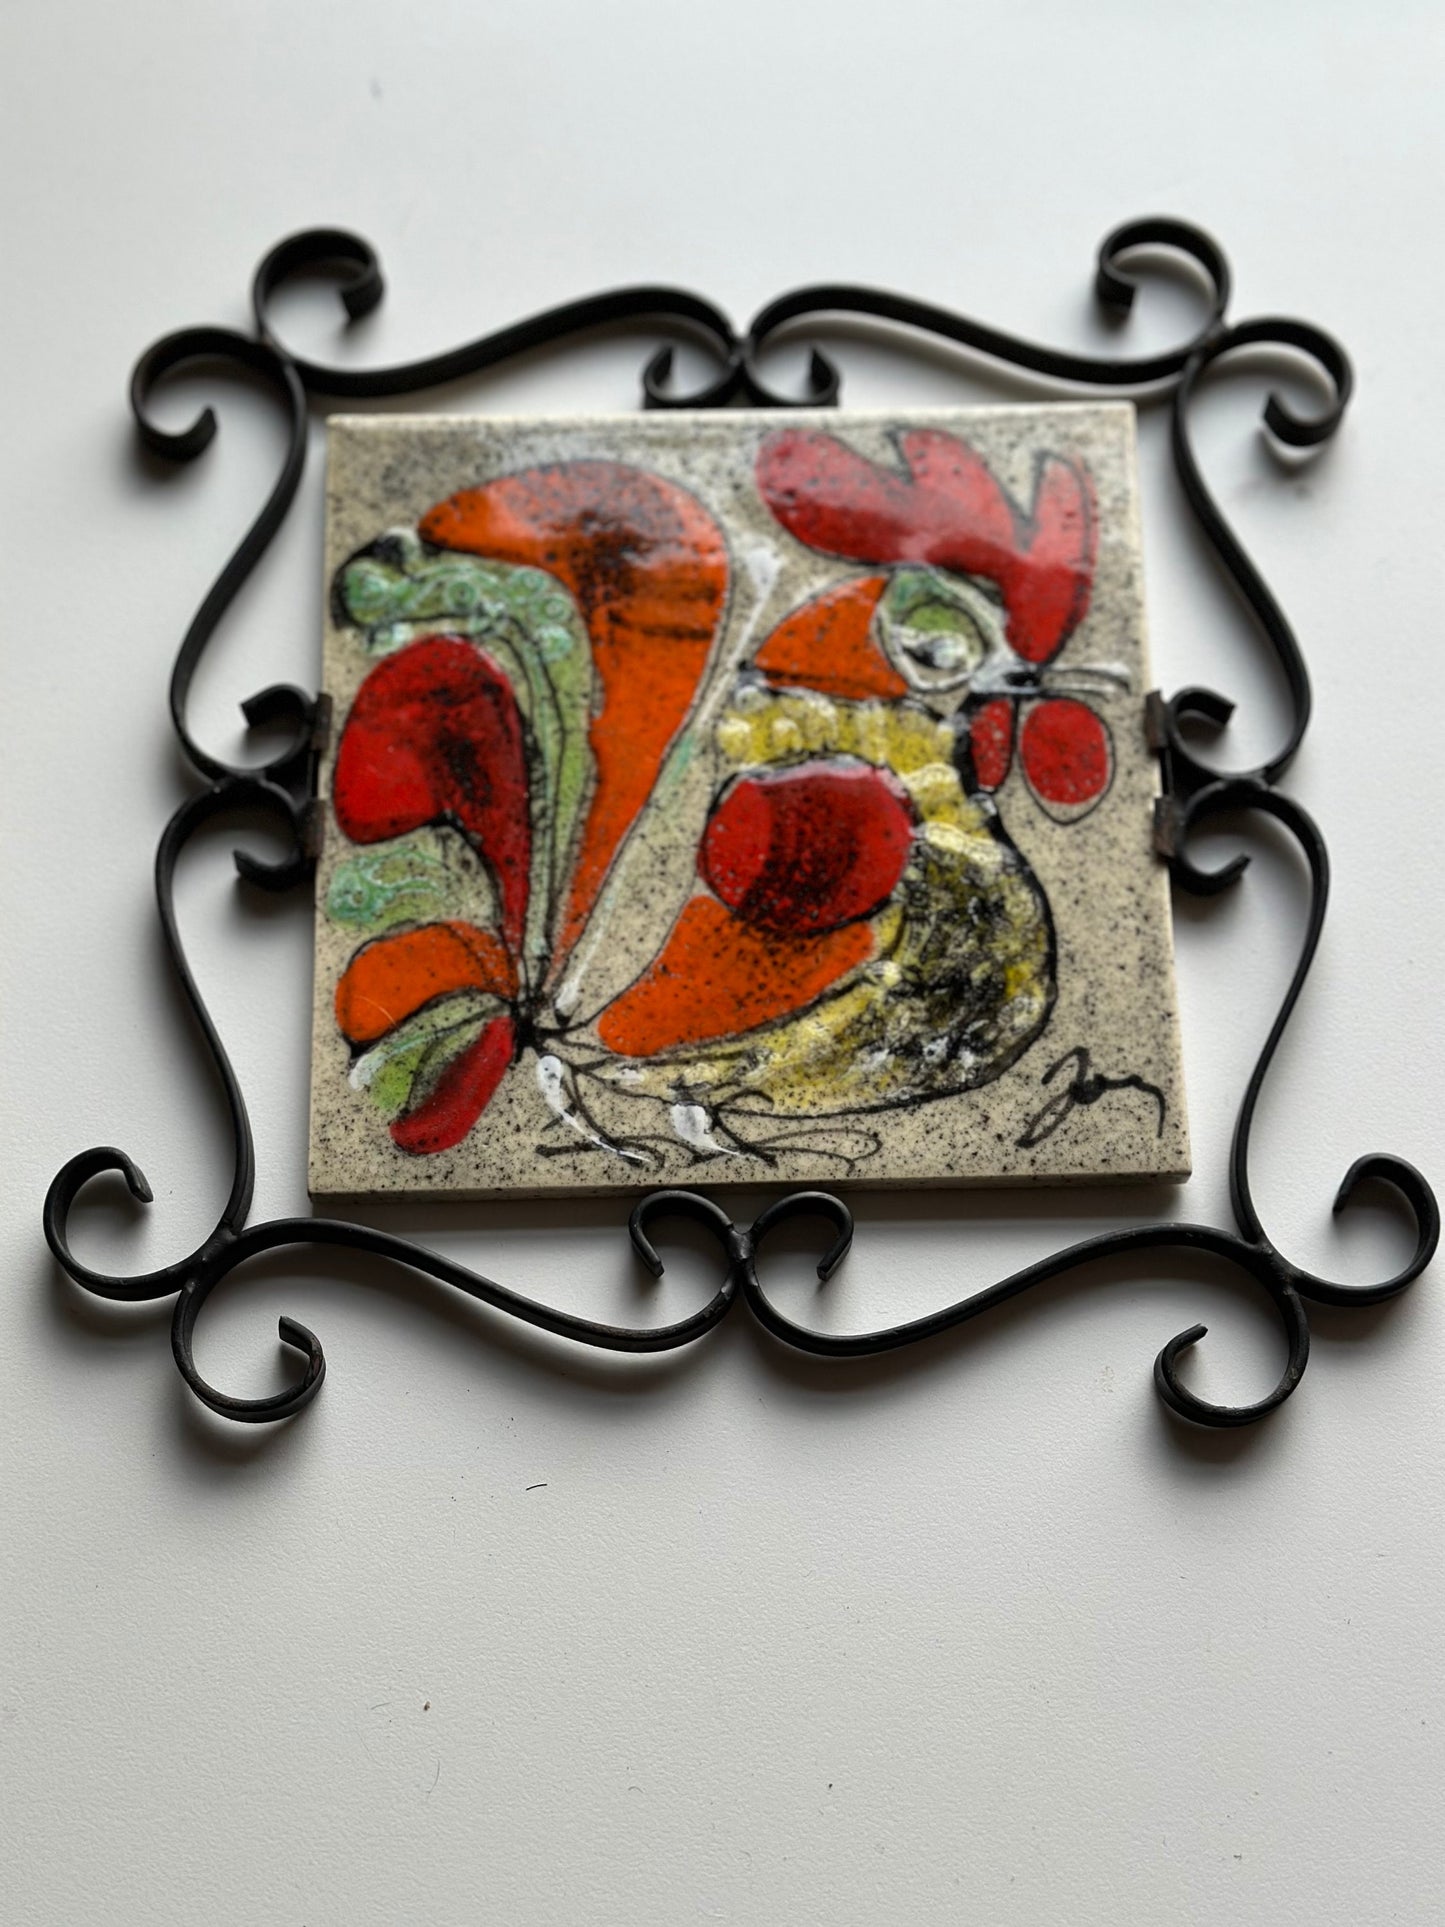 Delassus Fourmaintraux Desvres French earthenware tile Trivet 1960s 70s with Wrought Iron Frame